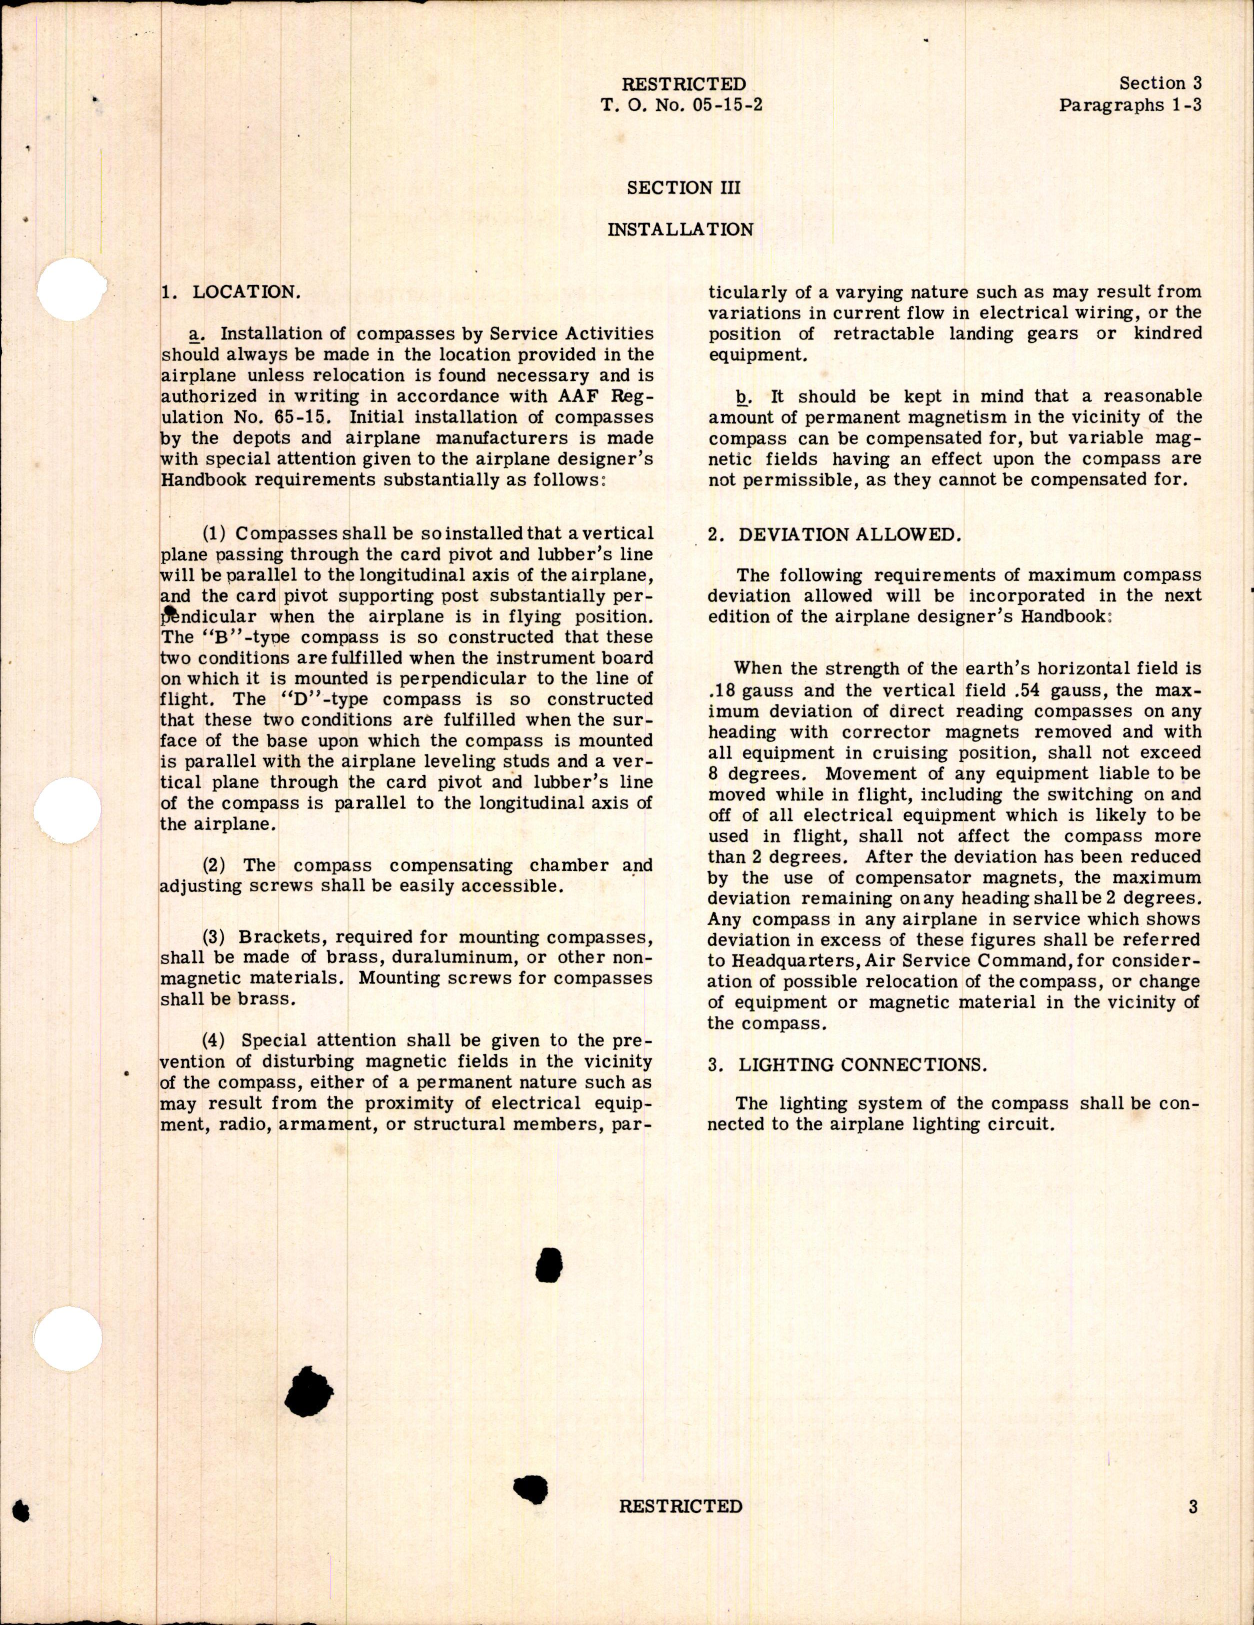 Sample page 5 from AirCorps Library document: Instructions for Magnetic Type Compasses B-12, B-16 & B-17